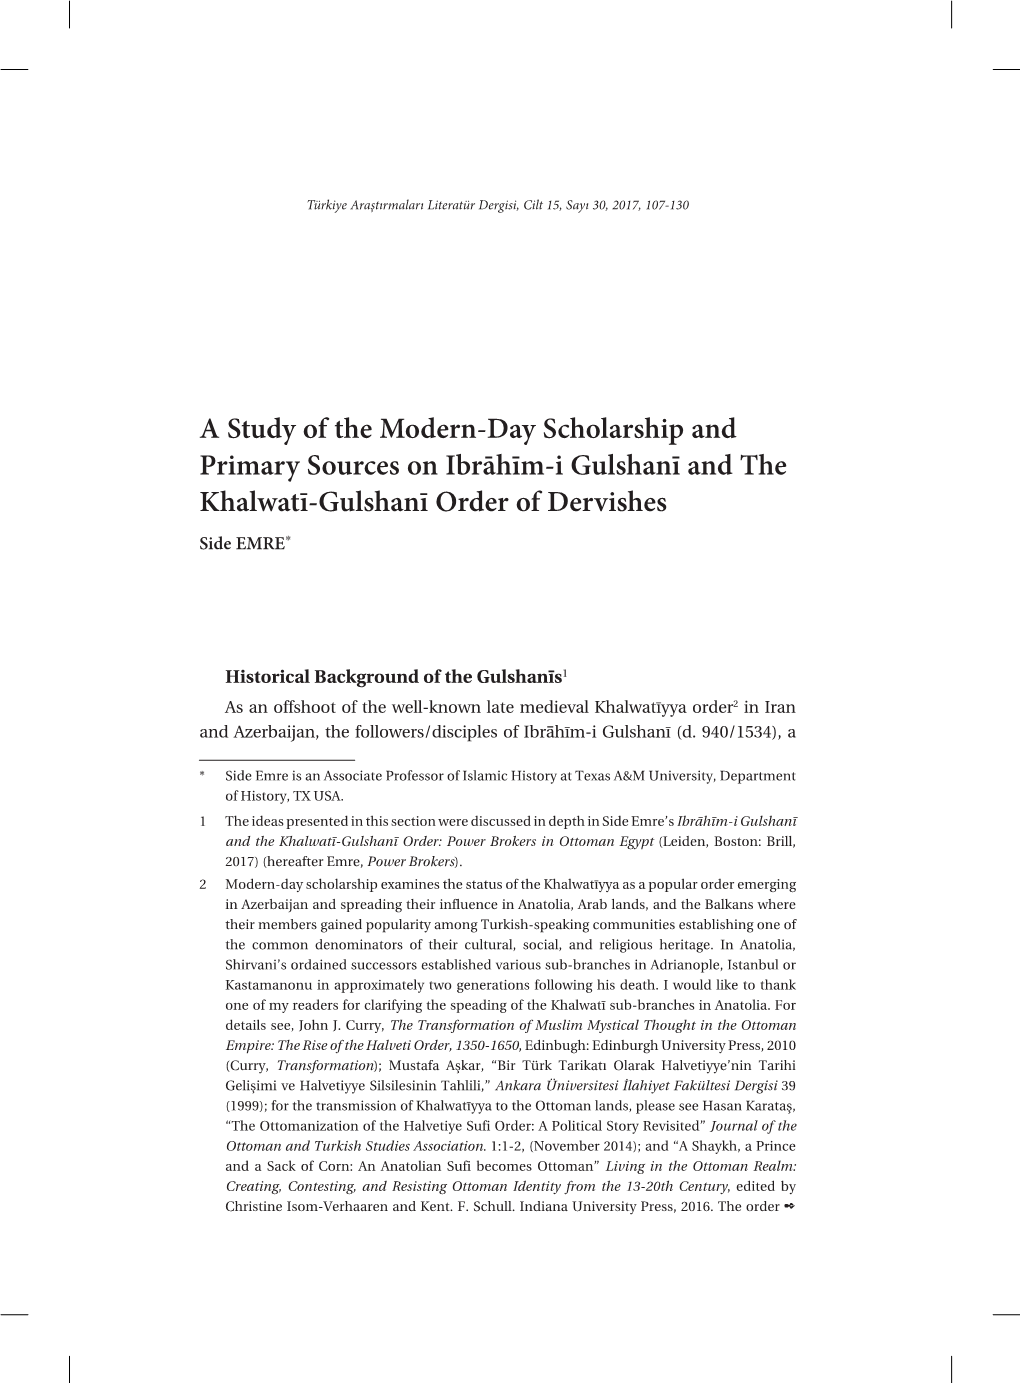 A Study of the Modern-Day Scholarship and Primary Sources on Ibrāhīm-I Gulshanī and the Khalwatī-Gulshanī Order of Dervishes Side EMRE*